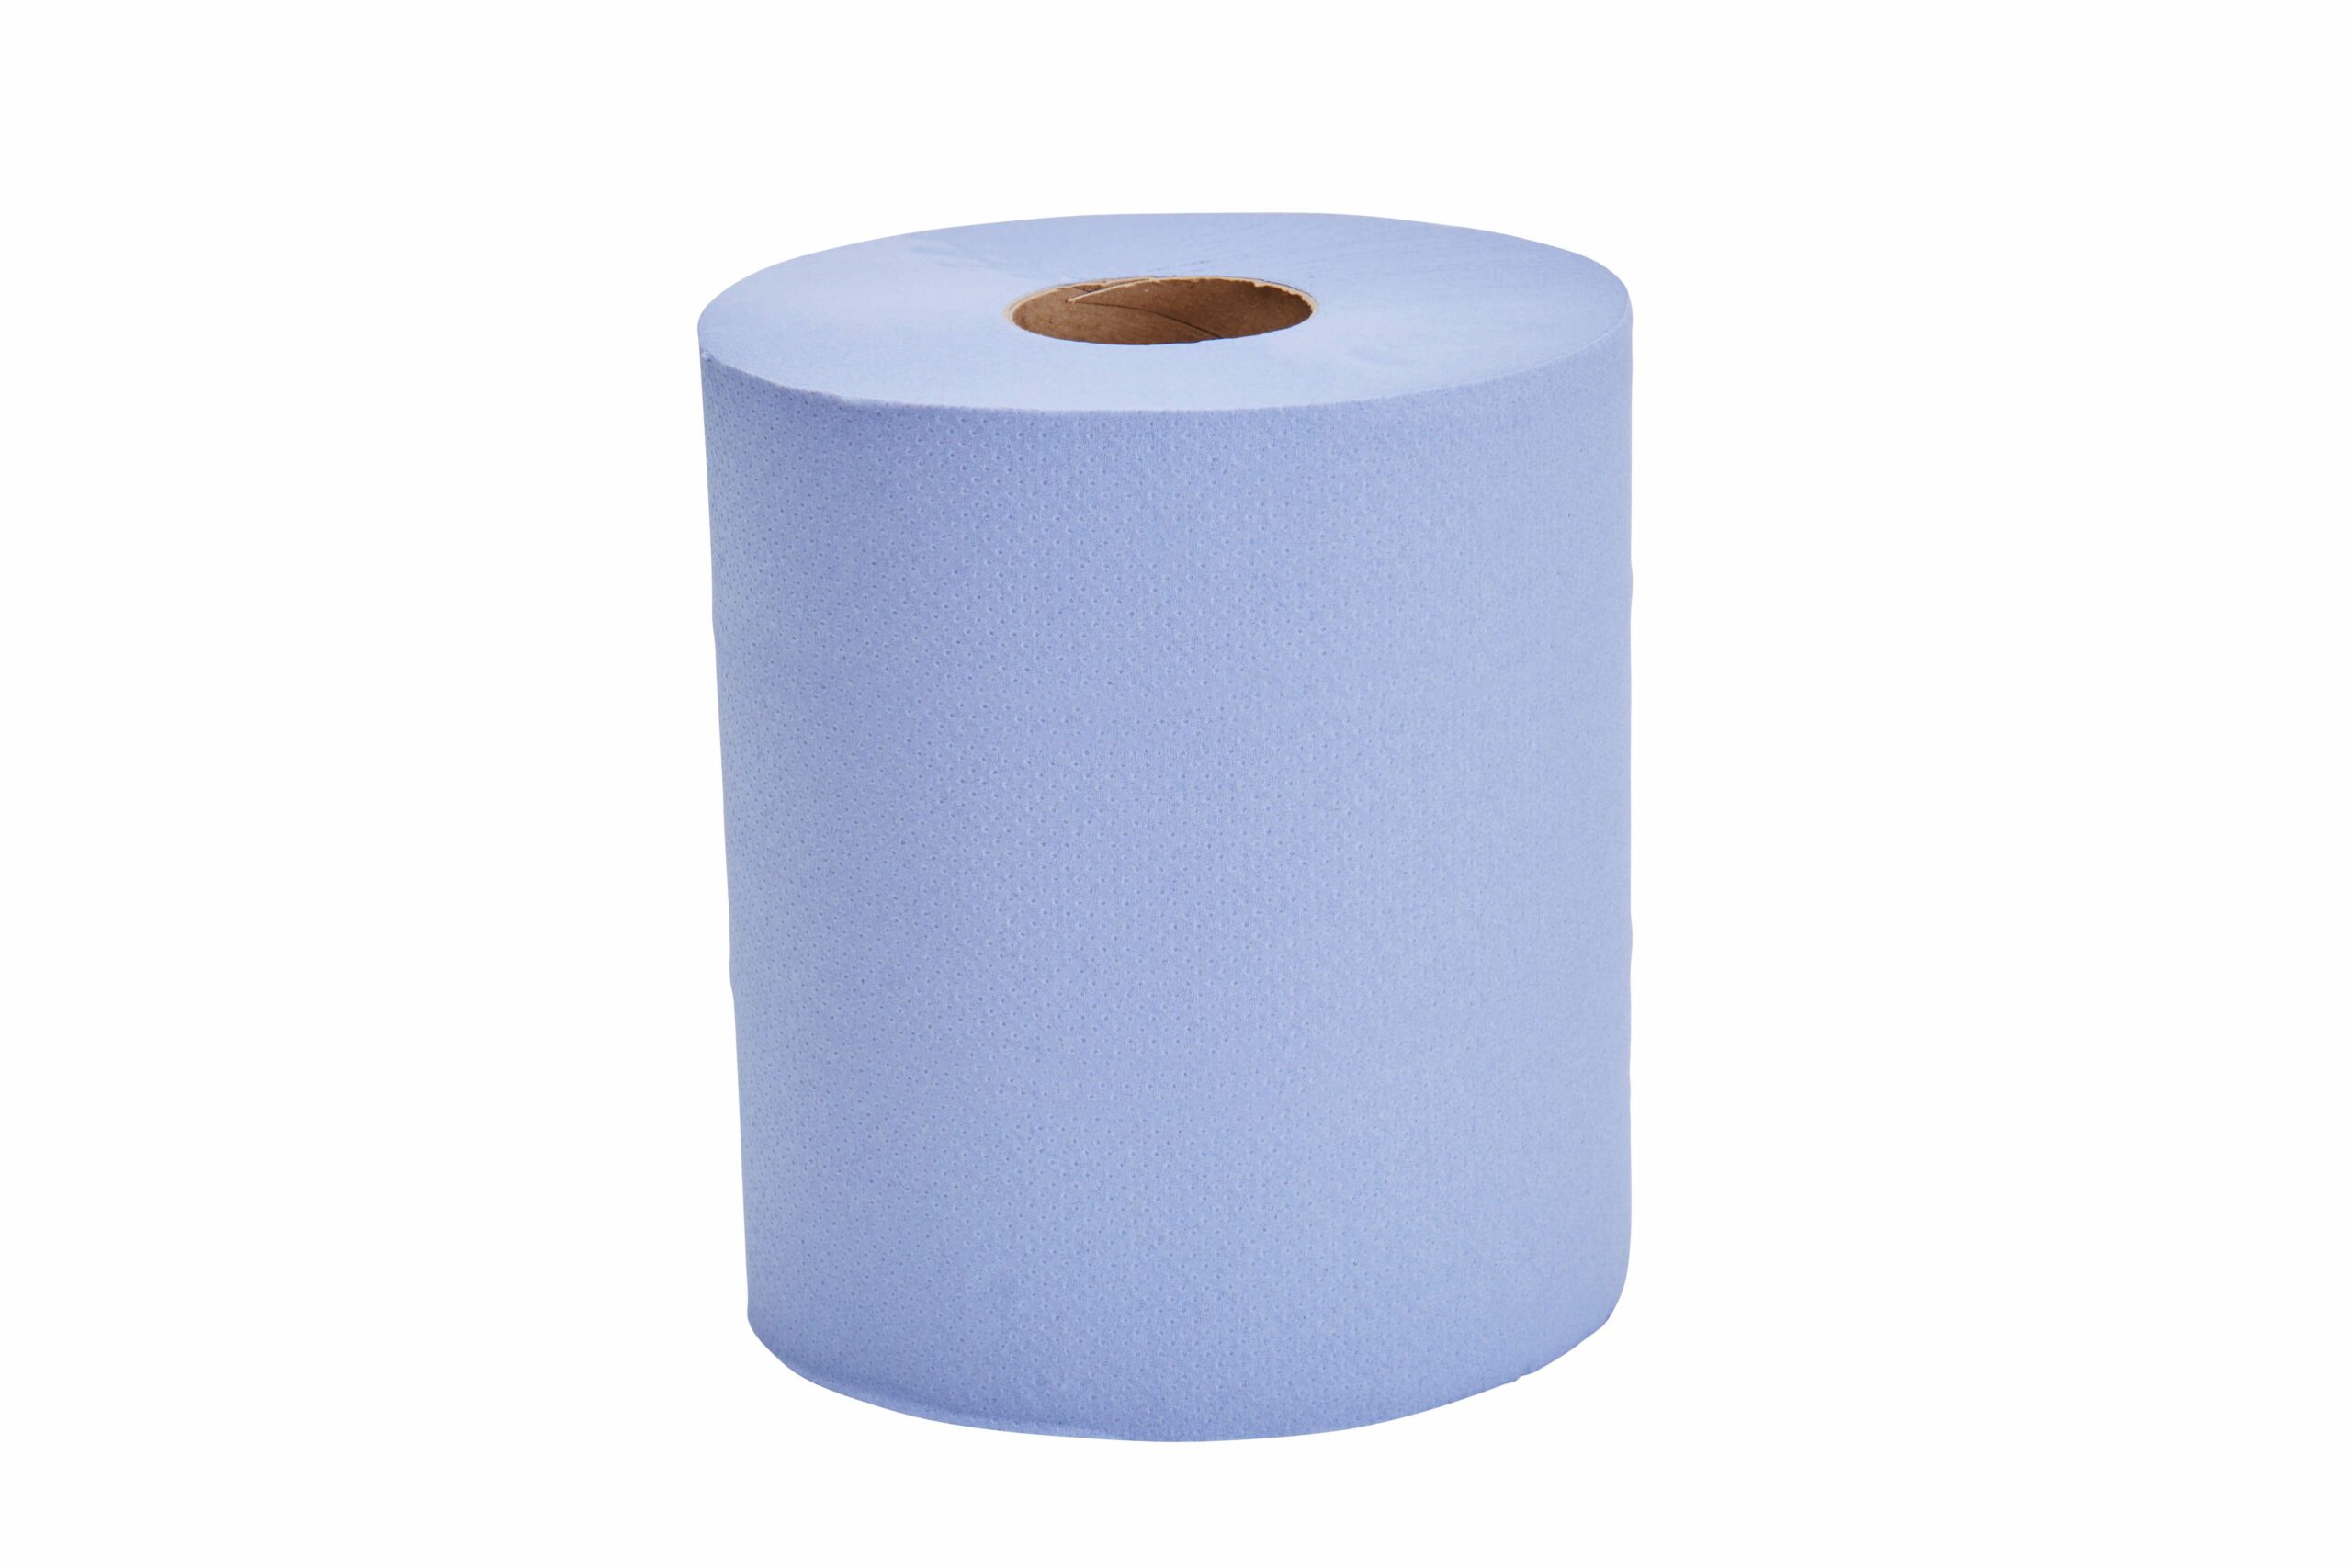 Jangro Contract Blue Centrefeed Roll 2-Ply 120M (6 Pack)